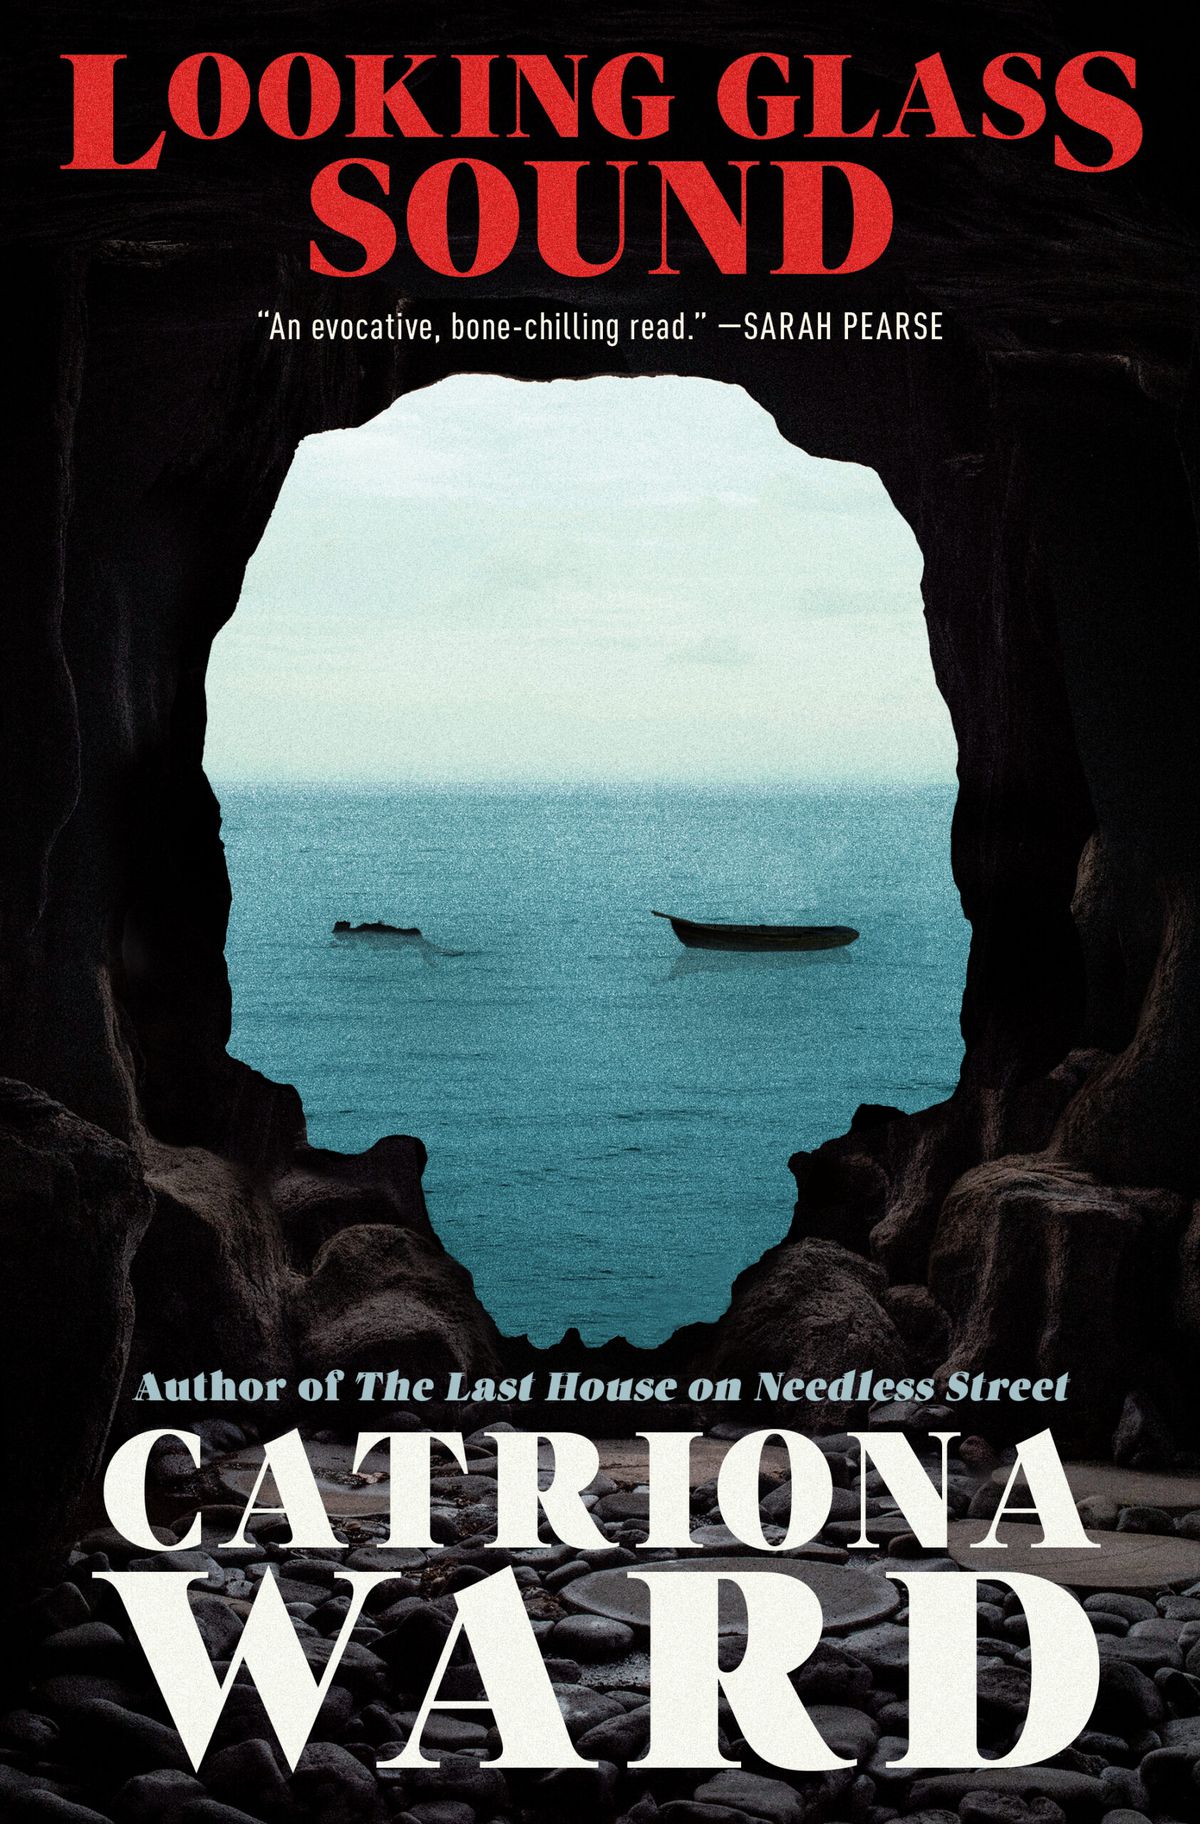 Cover image of Catriona Ward’s Looking Glass Sound. The image is from inside a cave, with a skull-shaped exit out into the ocean, where we see an empty boat and a person floating.